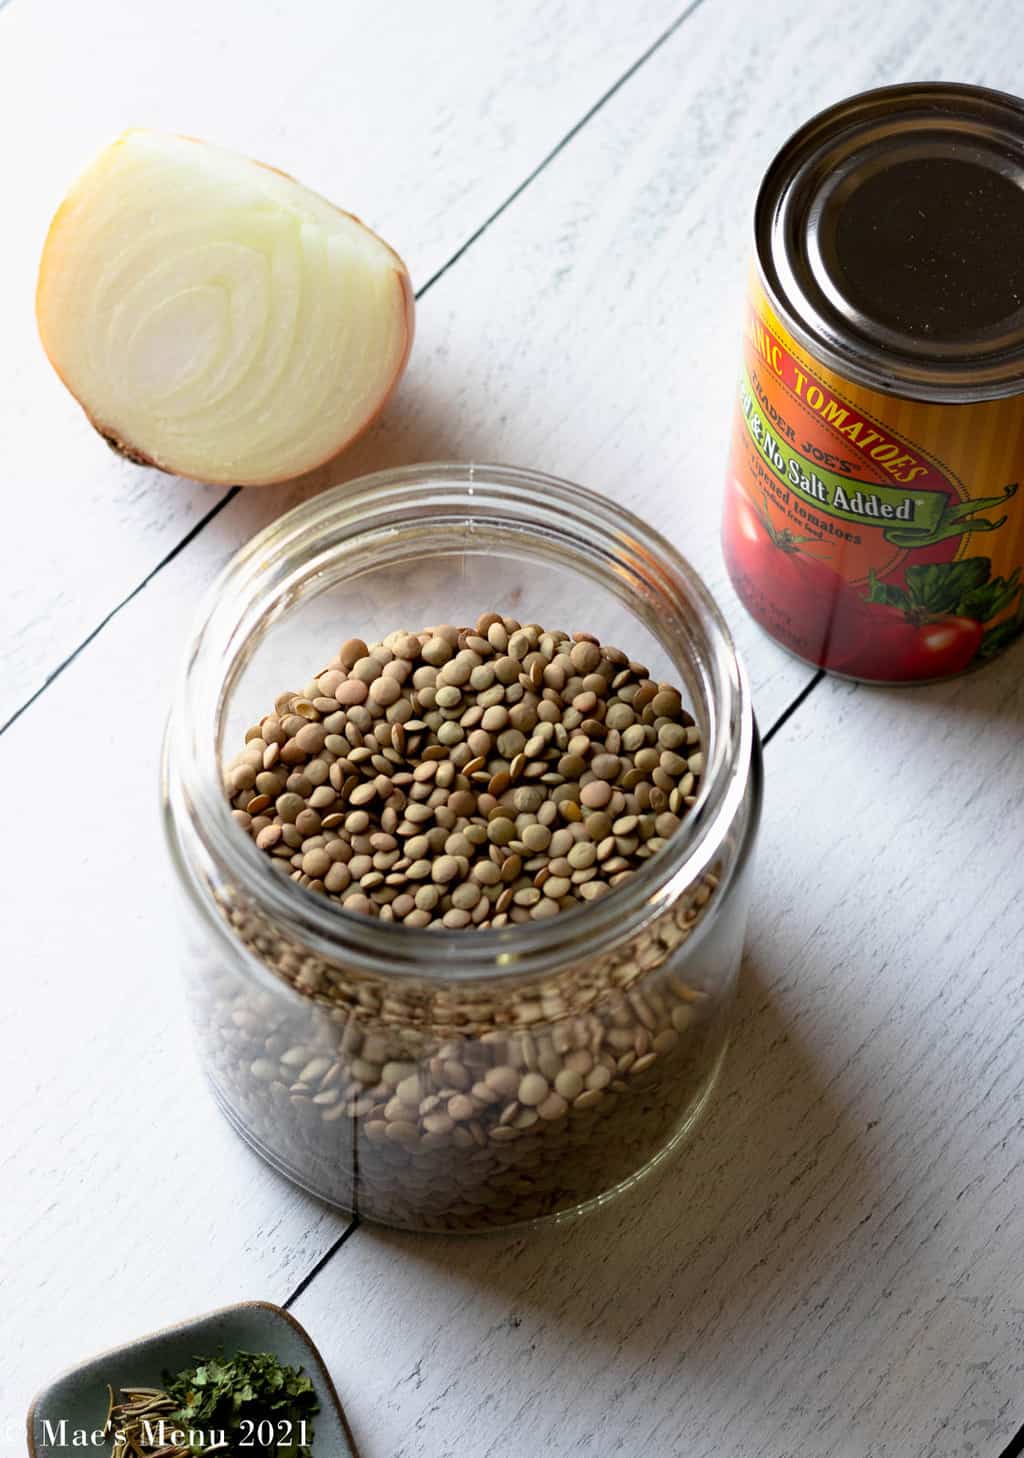 A clear glass container of lentils surrounded by half an onion, a can of tomatoes, and herbs